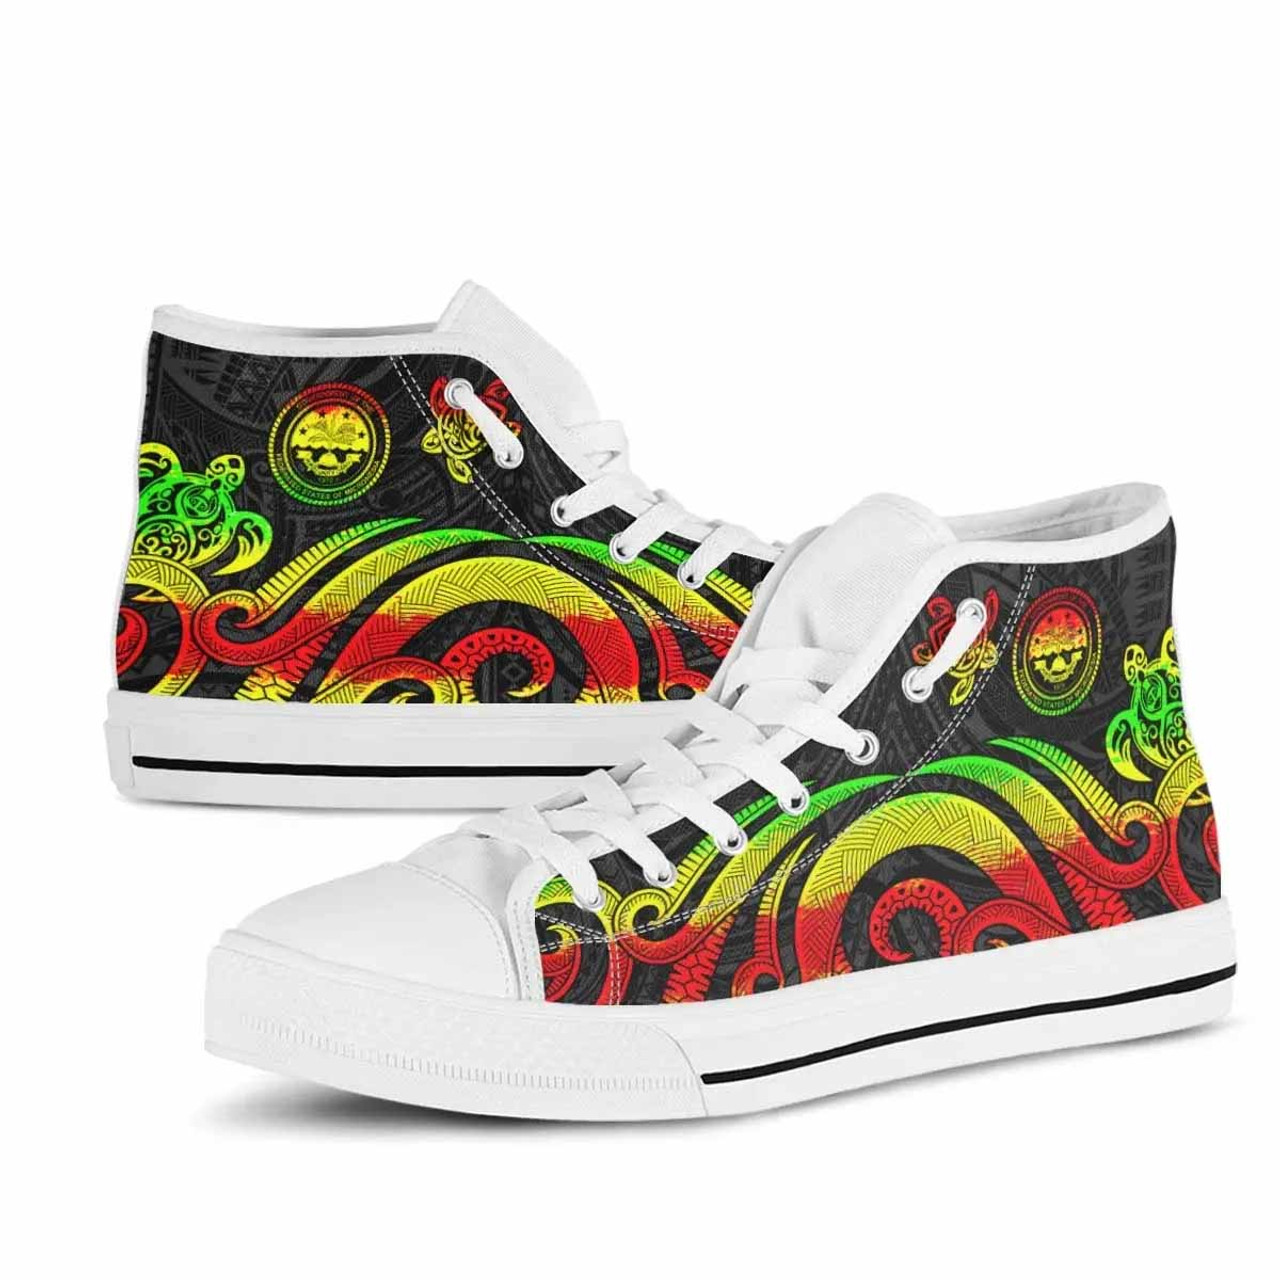 Federated States of Micronesia High Top Shoes - Reggae Tentacle Turtle 6